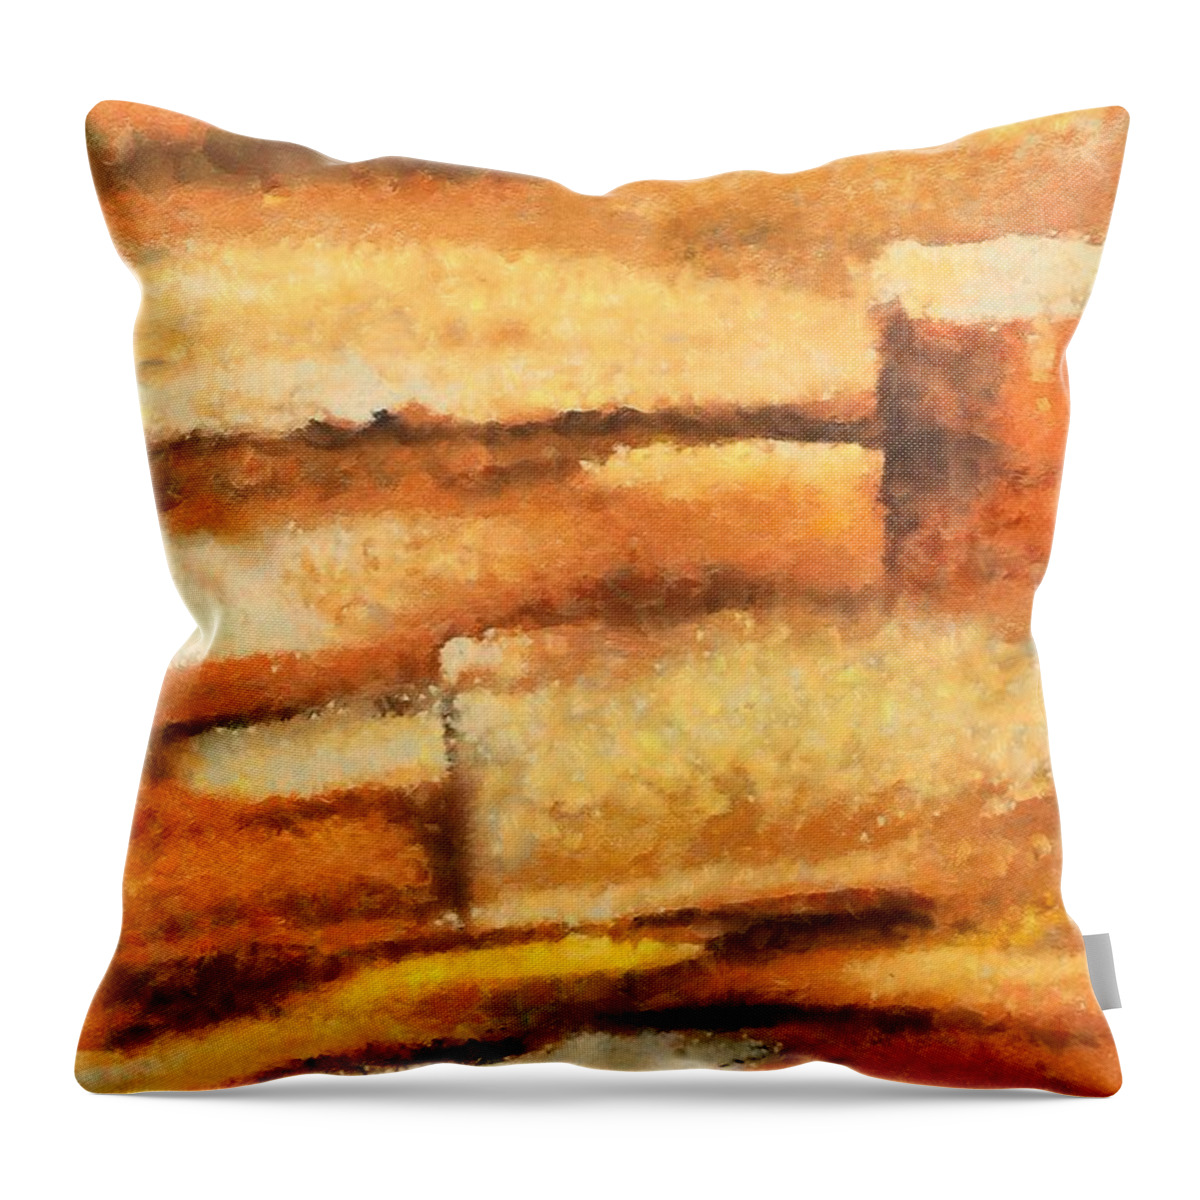 Mixed Media Throw Pillow featuring the mixed media Terra rossa by Dragica Micki Fortuna